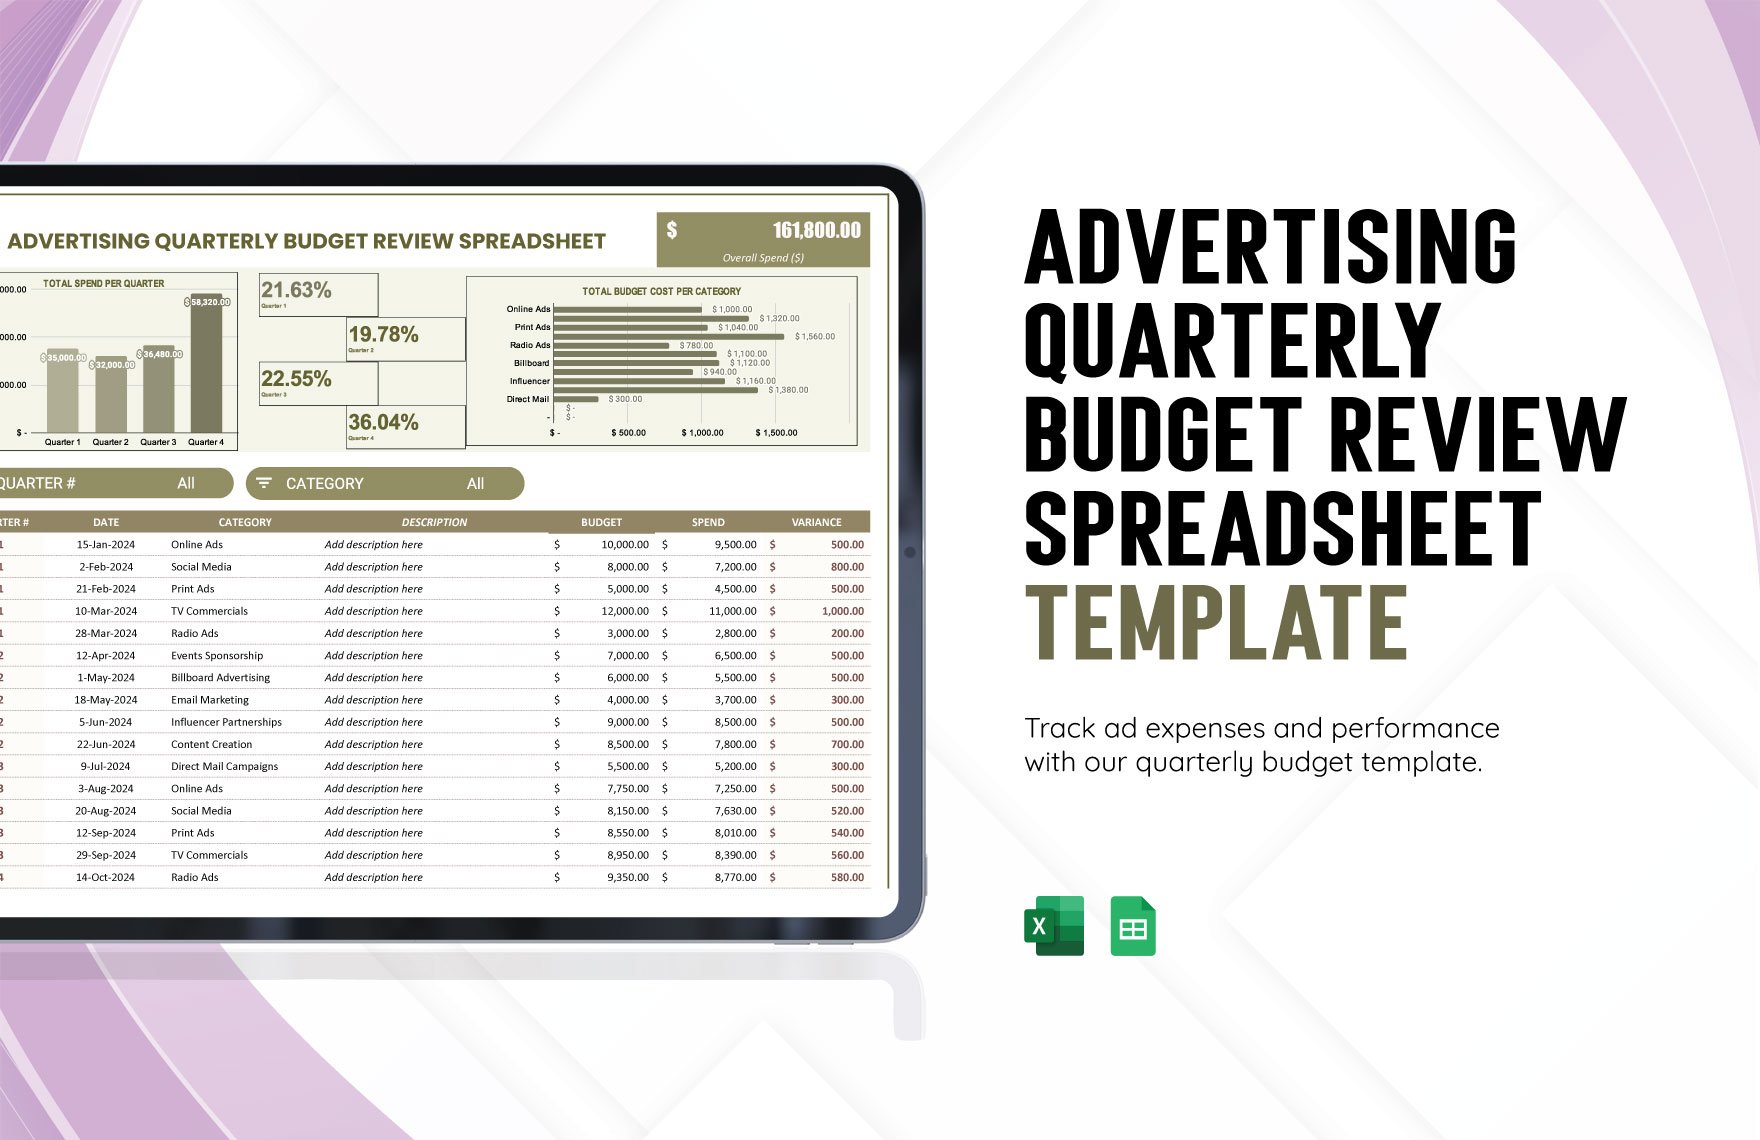 Advertising Quarterly Budget Review Spreadsheet Template in Excel, Google Sheets